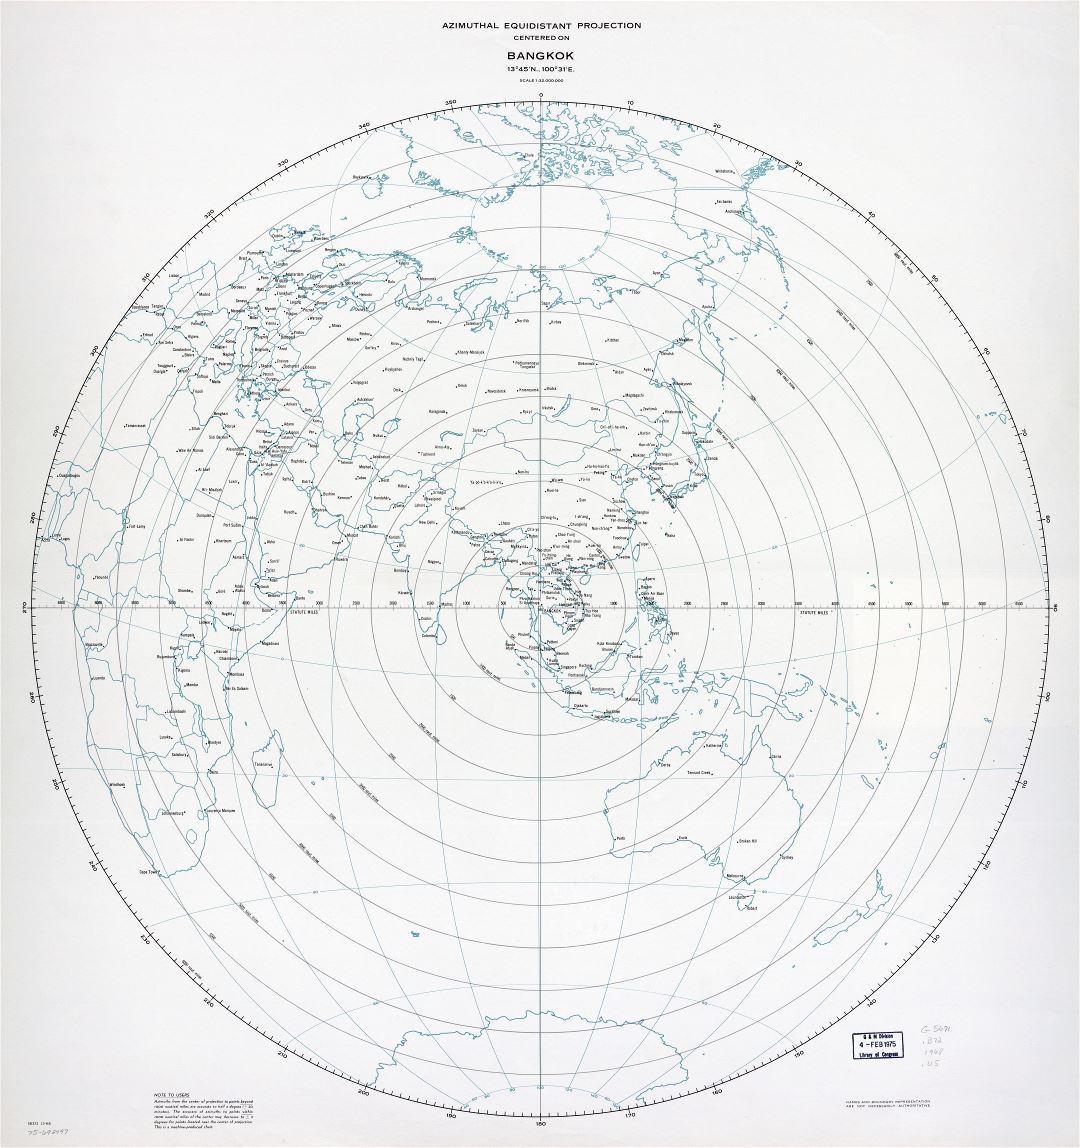 Large scale detailed azimuthal equidistant projection map centered on Bangkok - 1968